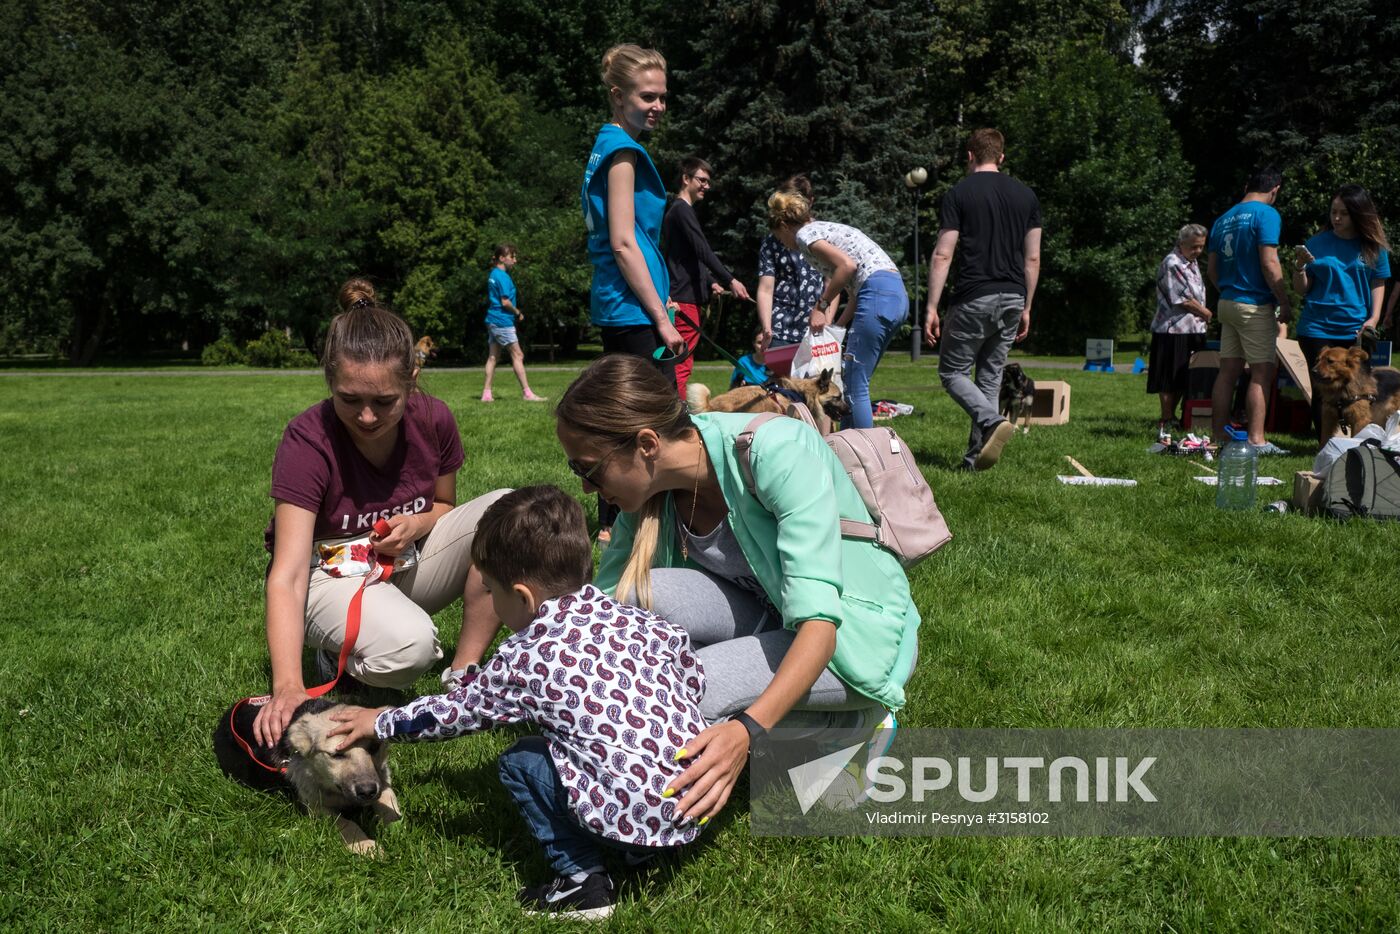 Life Companions festival for dogs and people